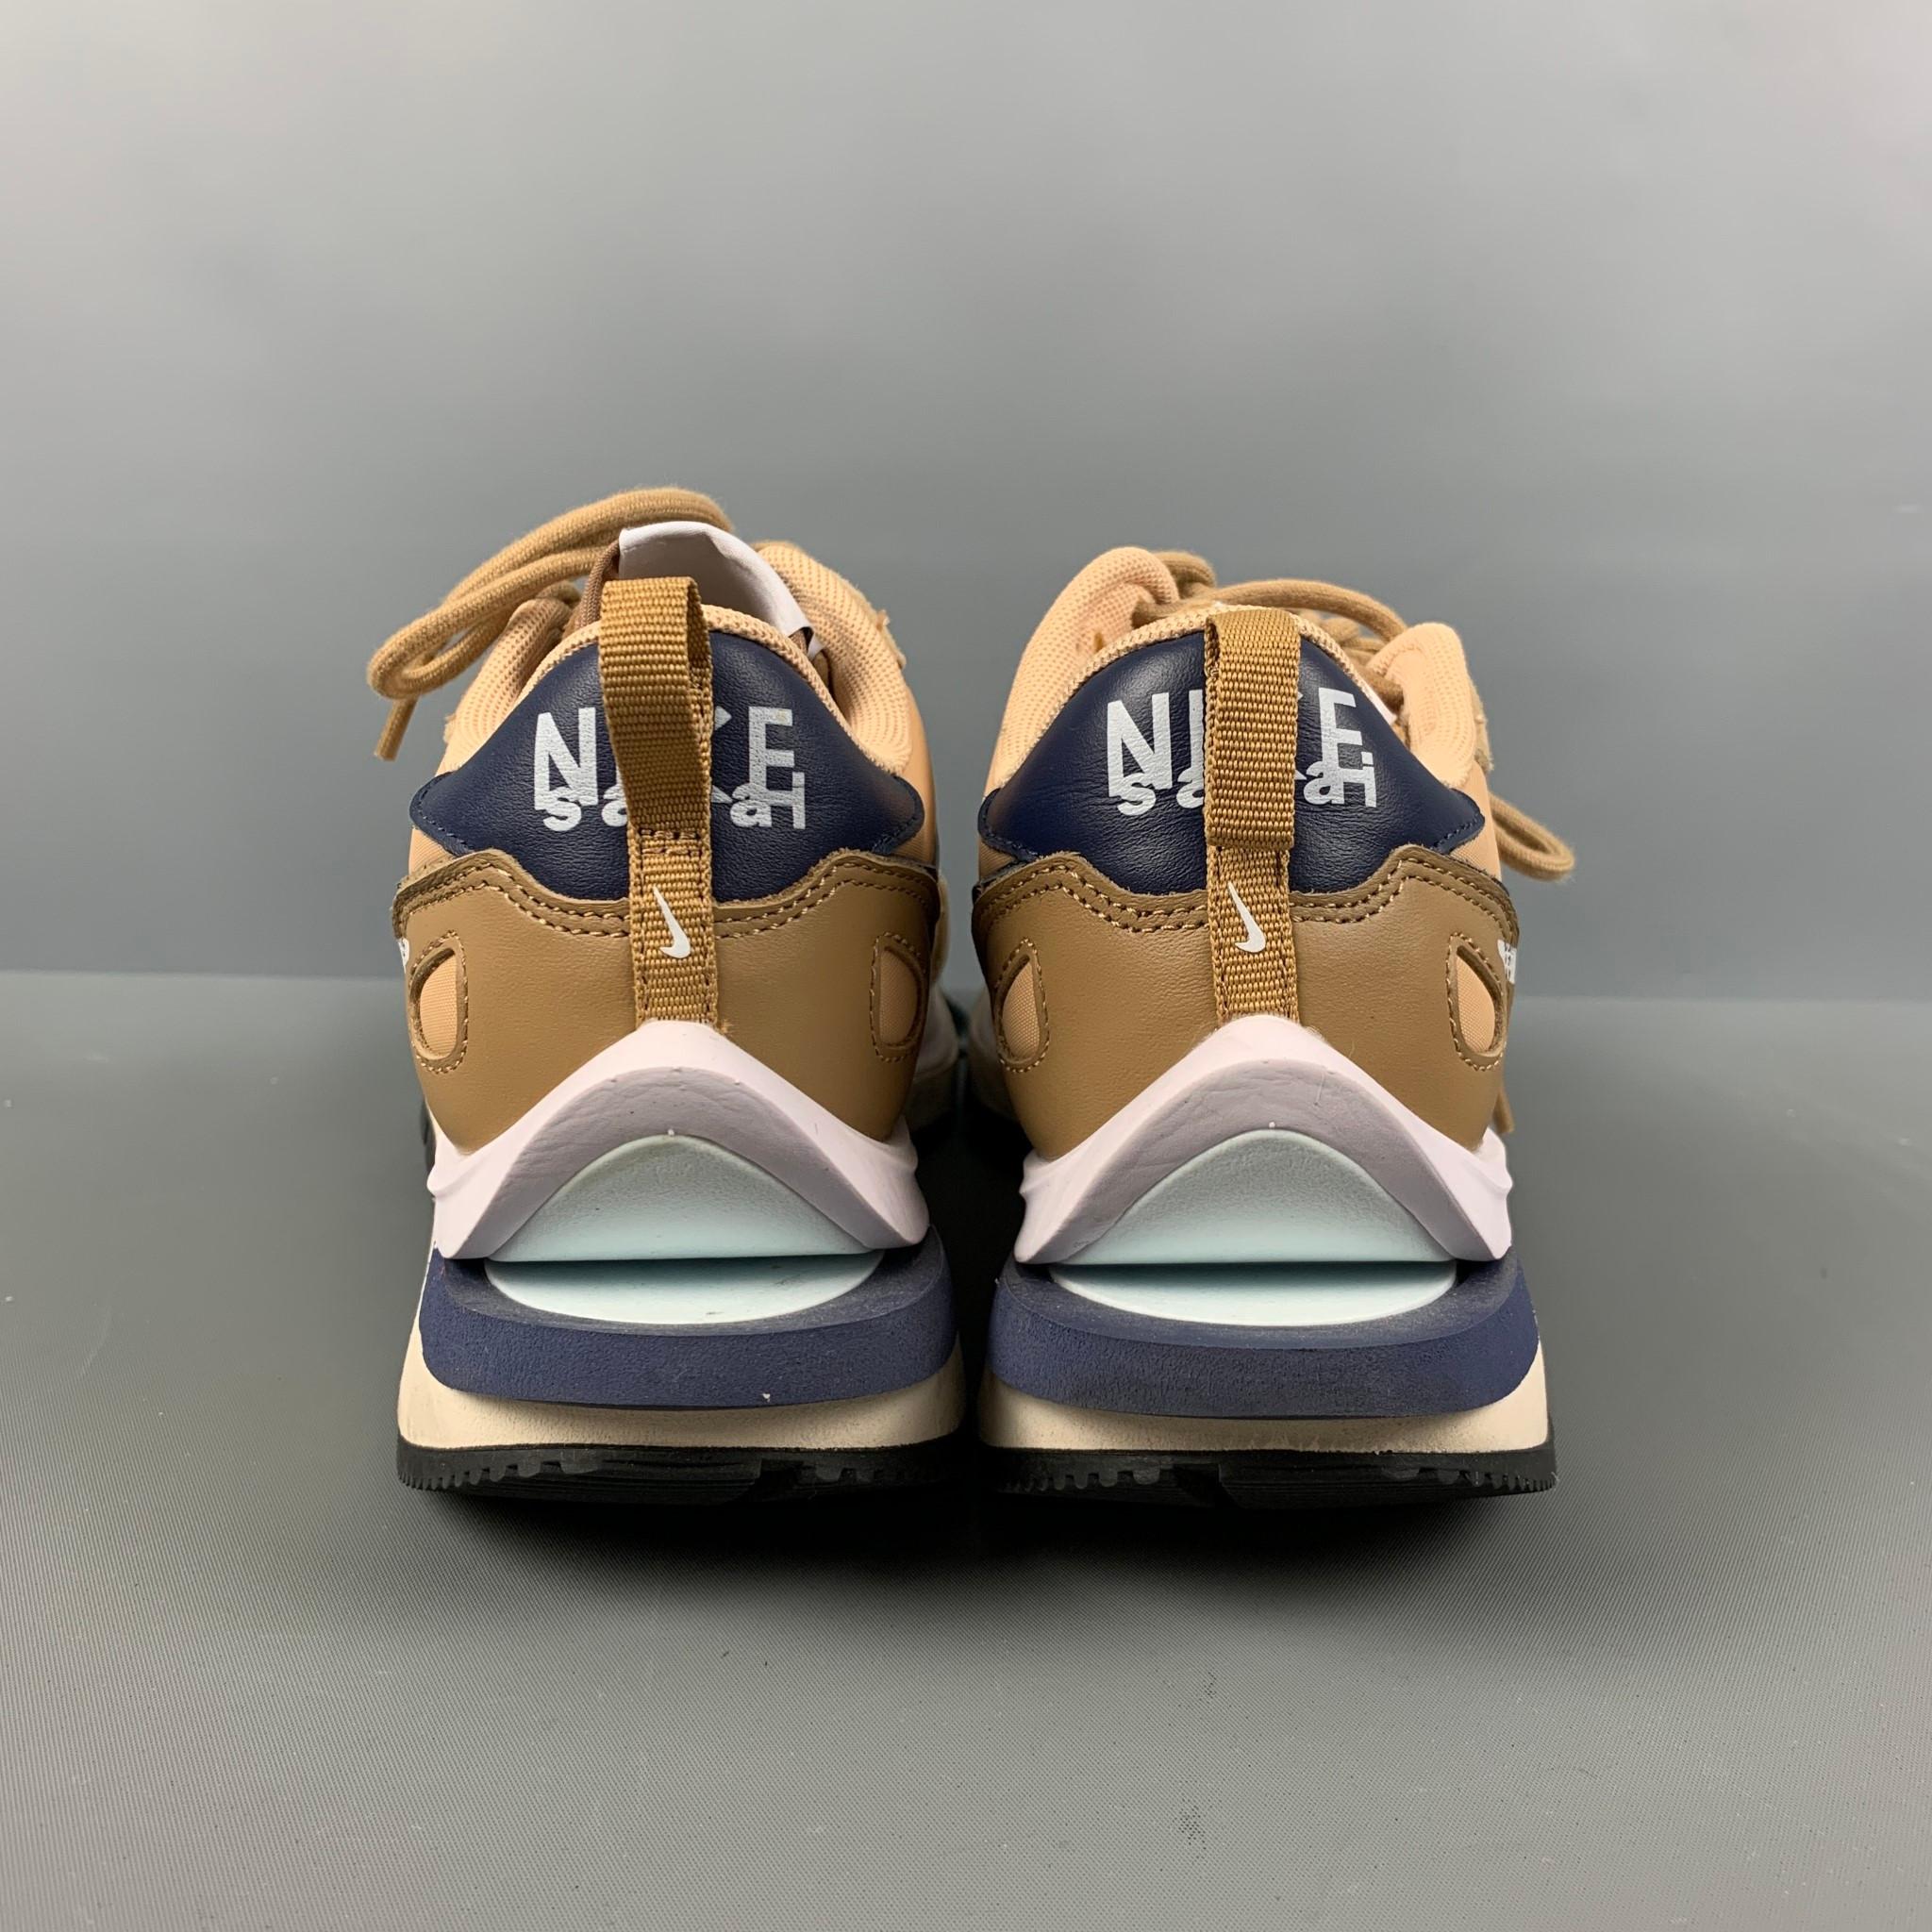 NIKE x SACAI Size 7.5 Tan Navy Mixed Materials Suede Runner Sneakers 1